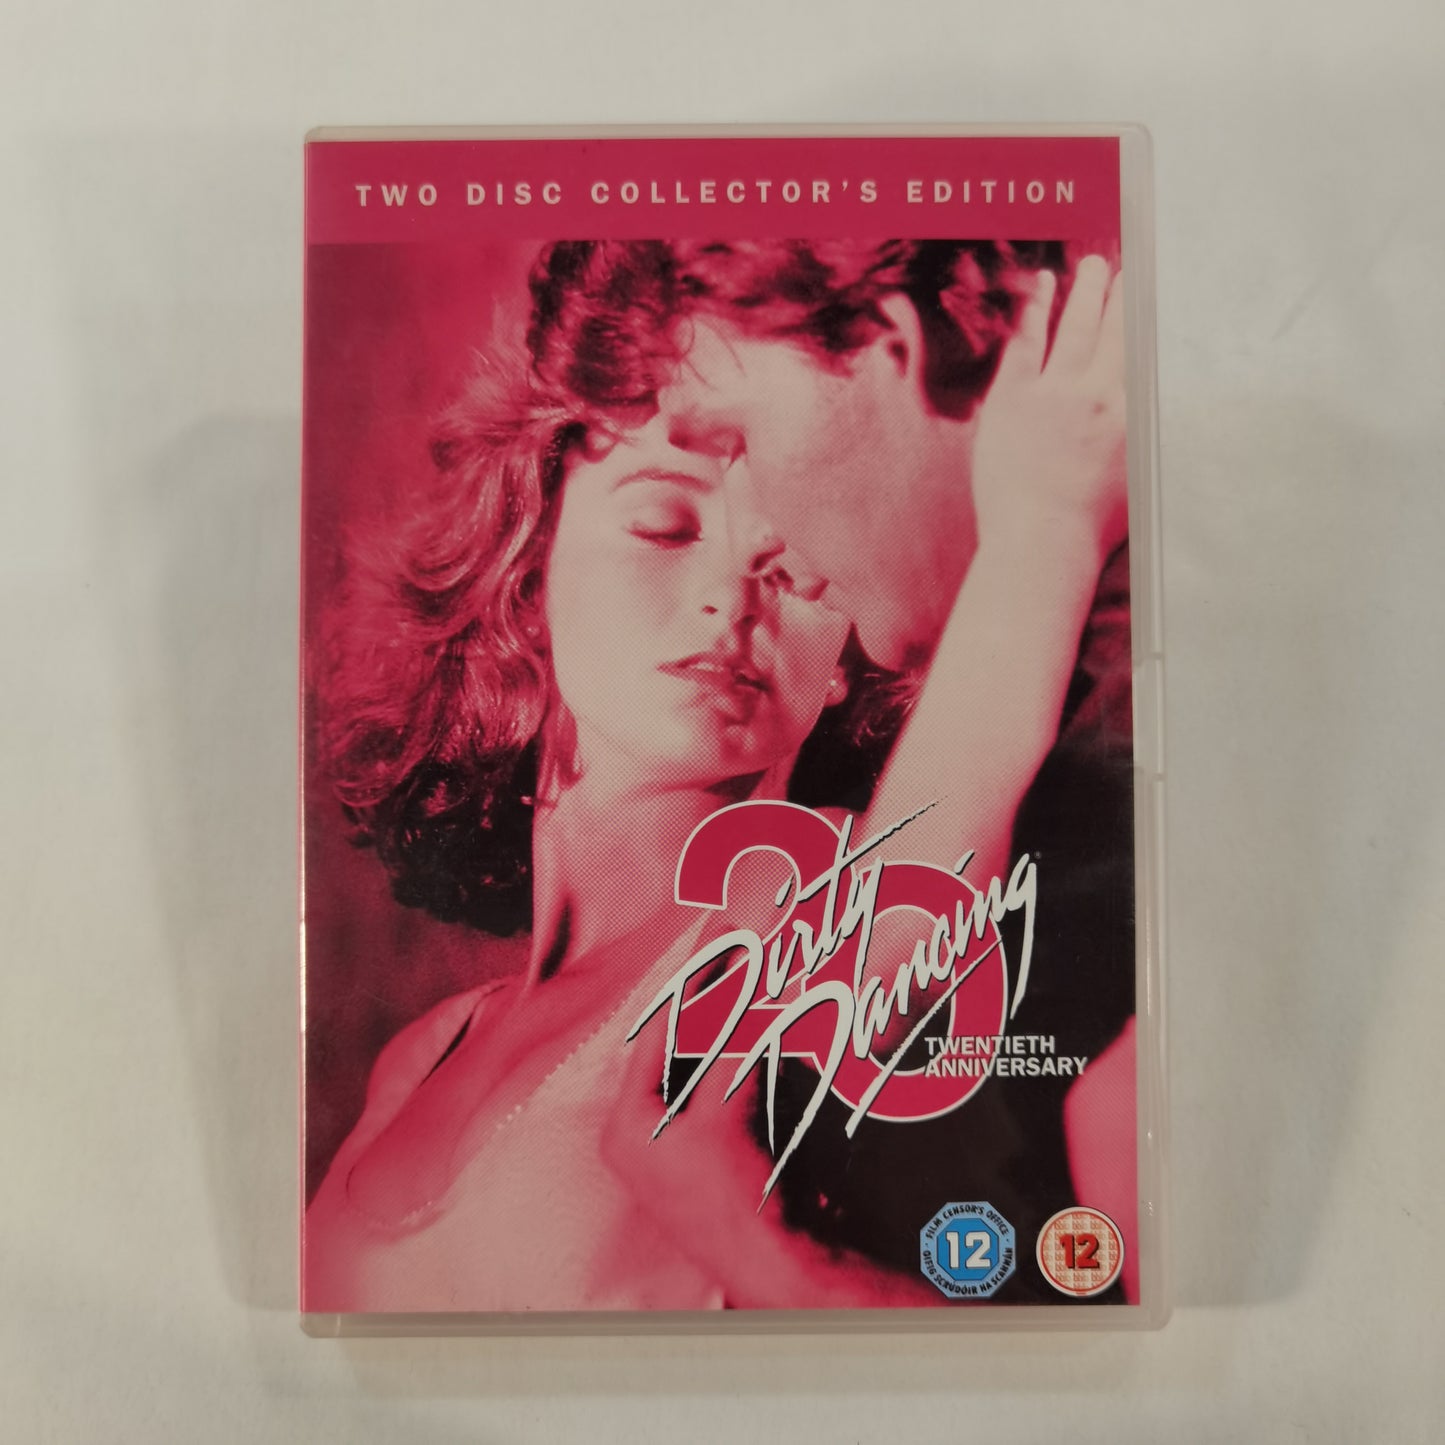 Dirty Dancing (1987) - DVD UK 2007 2-Disc Collector's Edition 20th Anniversary